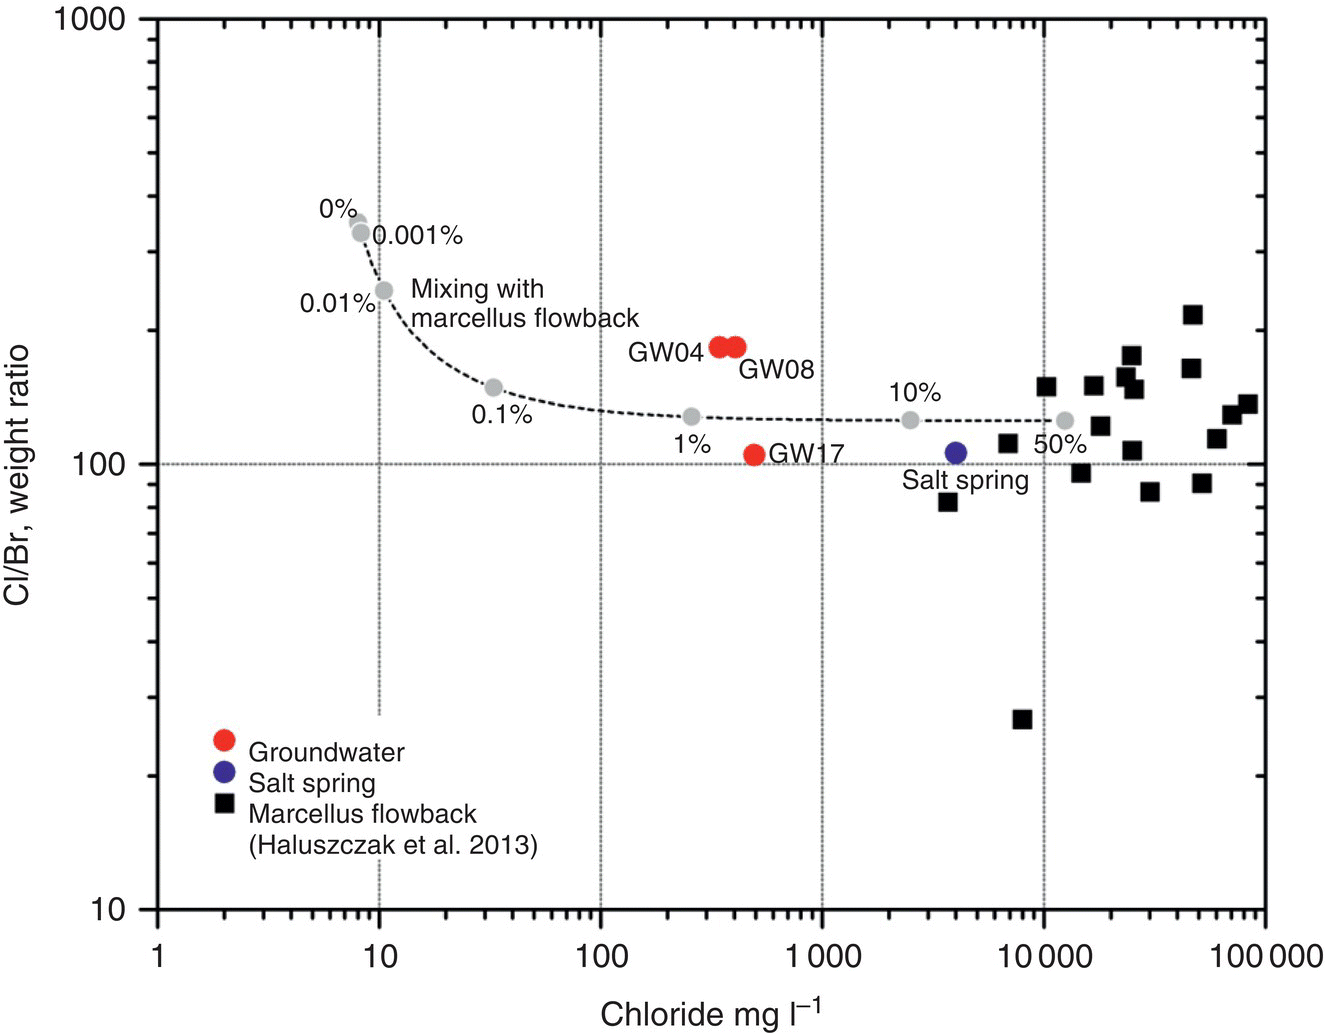 Graph of Cl/Br, weight ratio vs. chloride mg l–1 displaying a descending dashed curve with light-shaded circles for groundwater, dark-shaded circles for salt spring, and solid squares for Marcellus flowback.